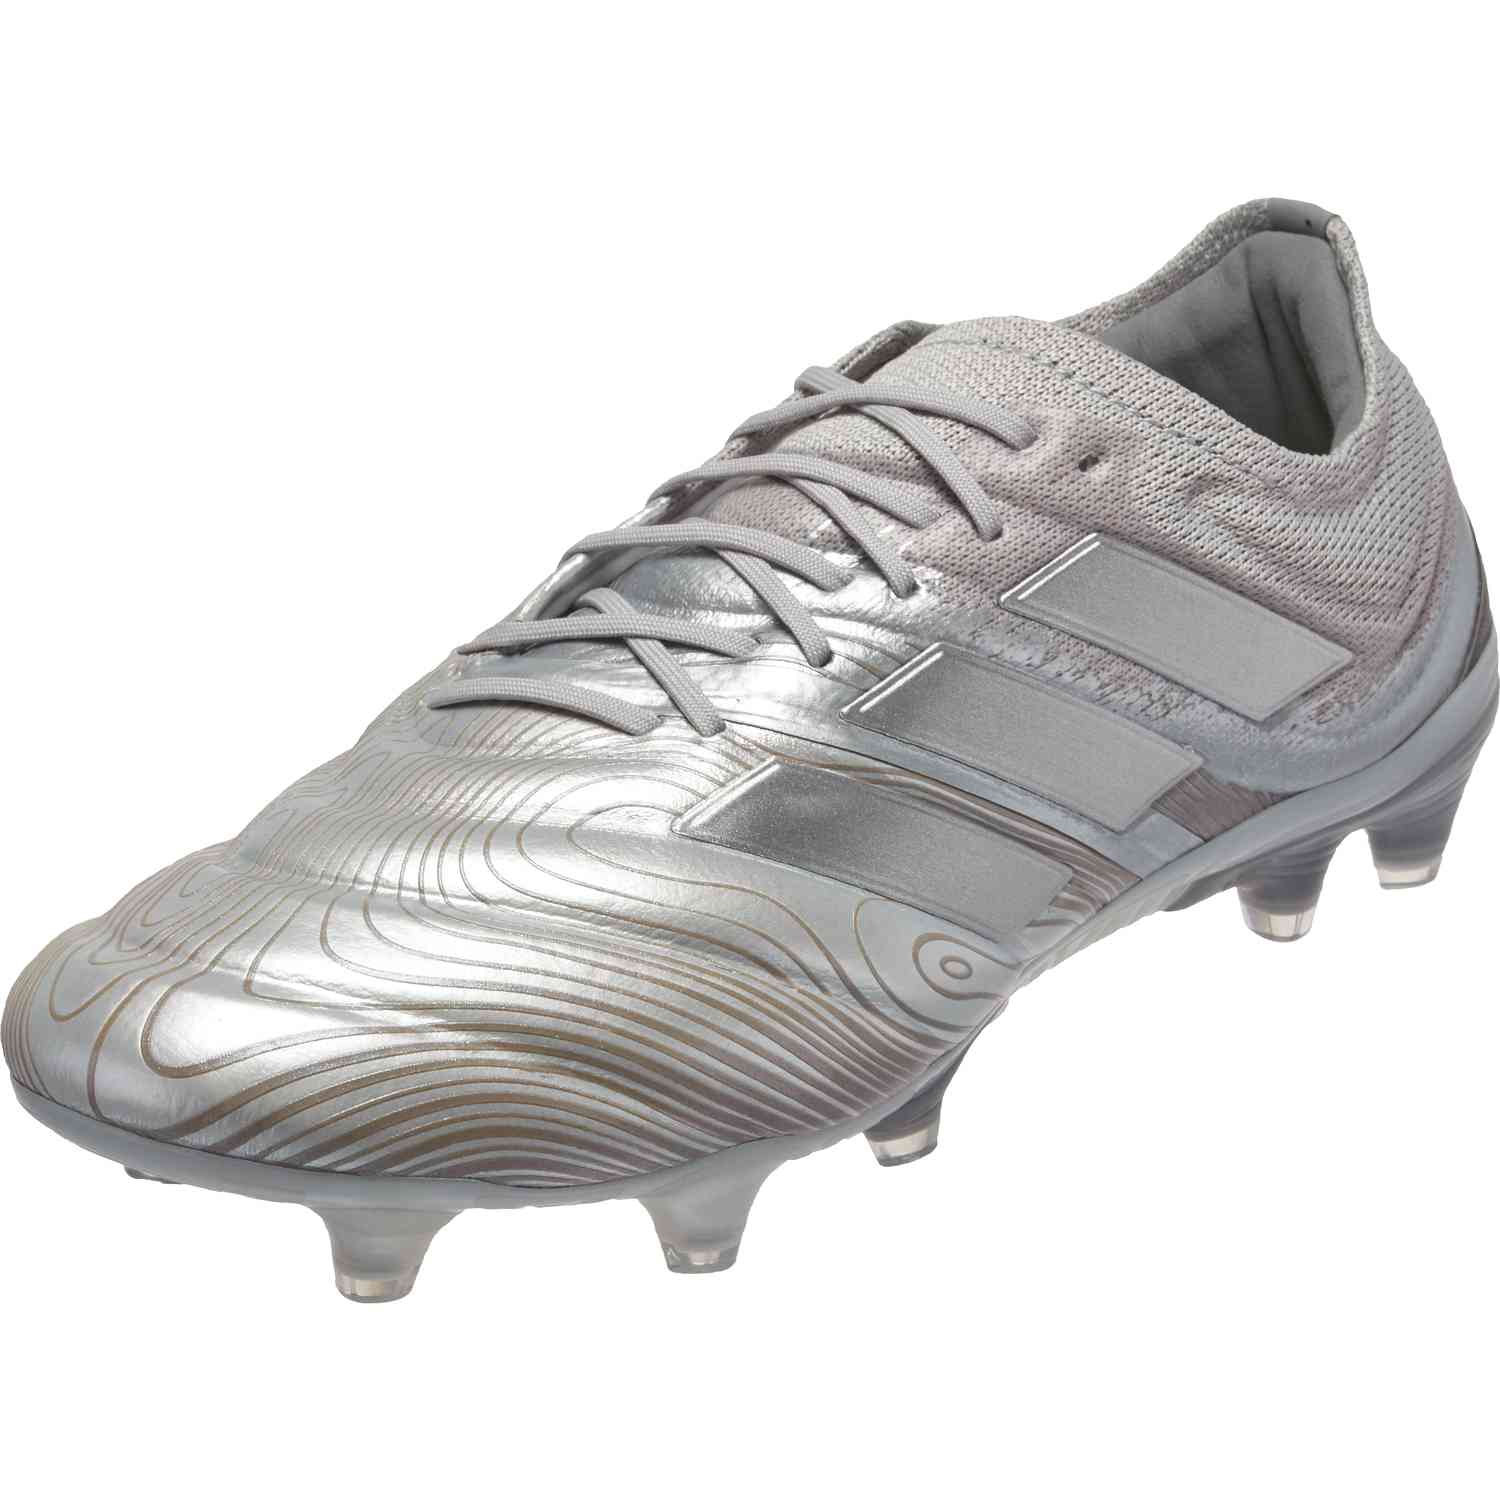 adidas copa 20.1 fg firm ground soccer cleat